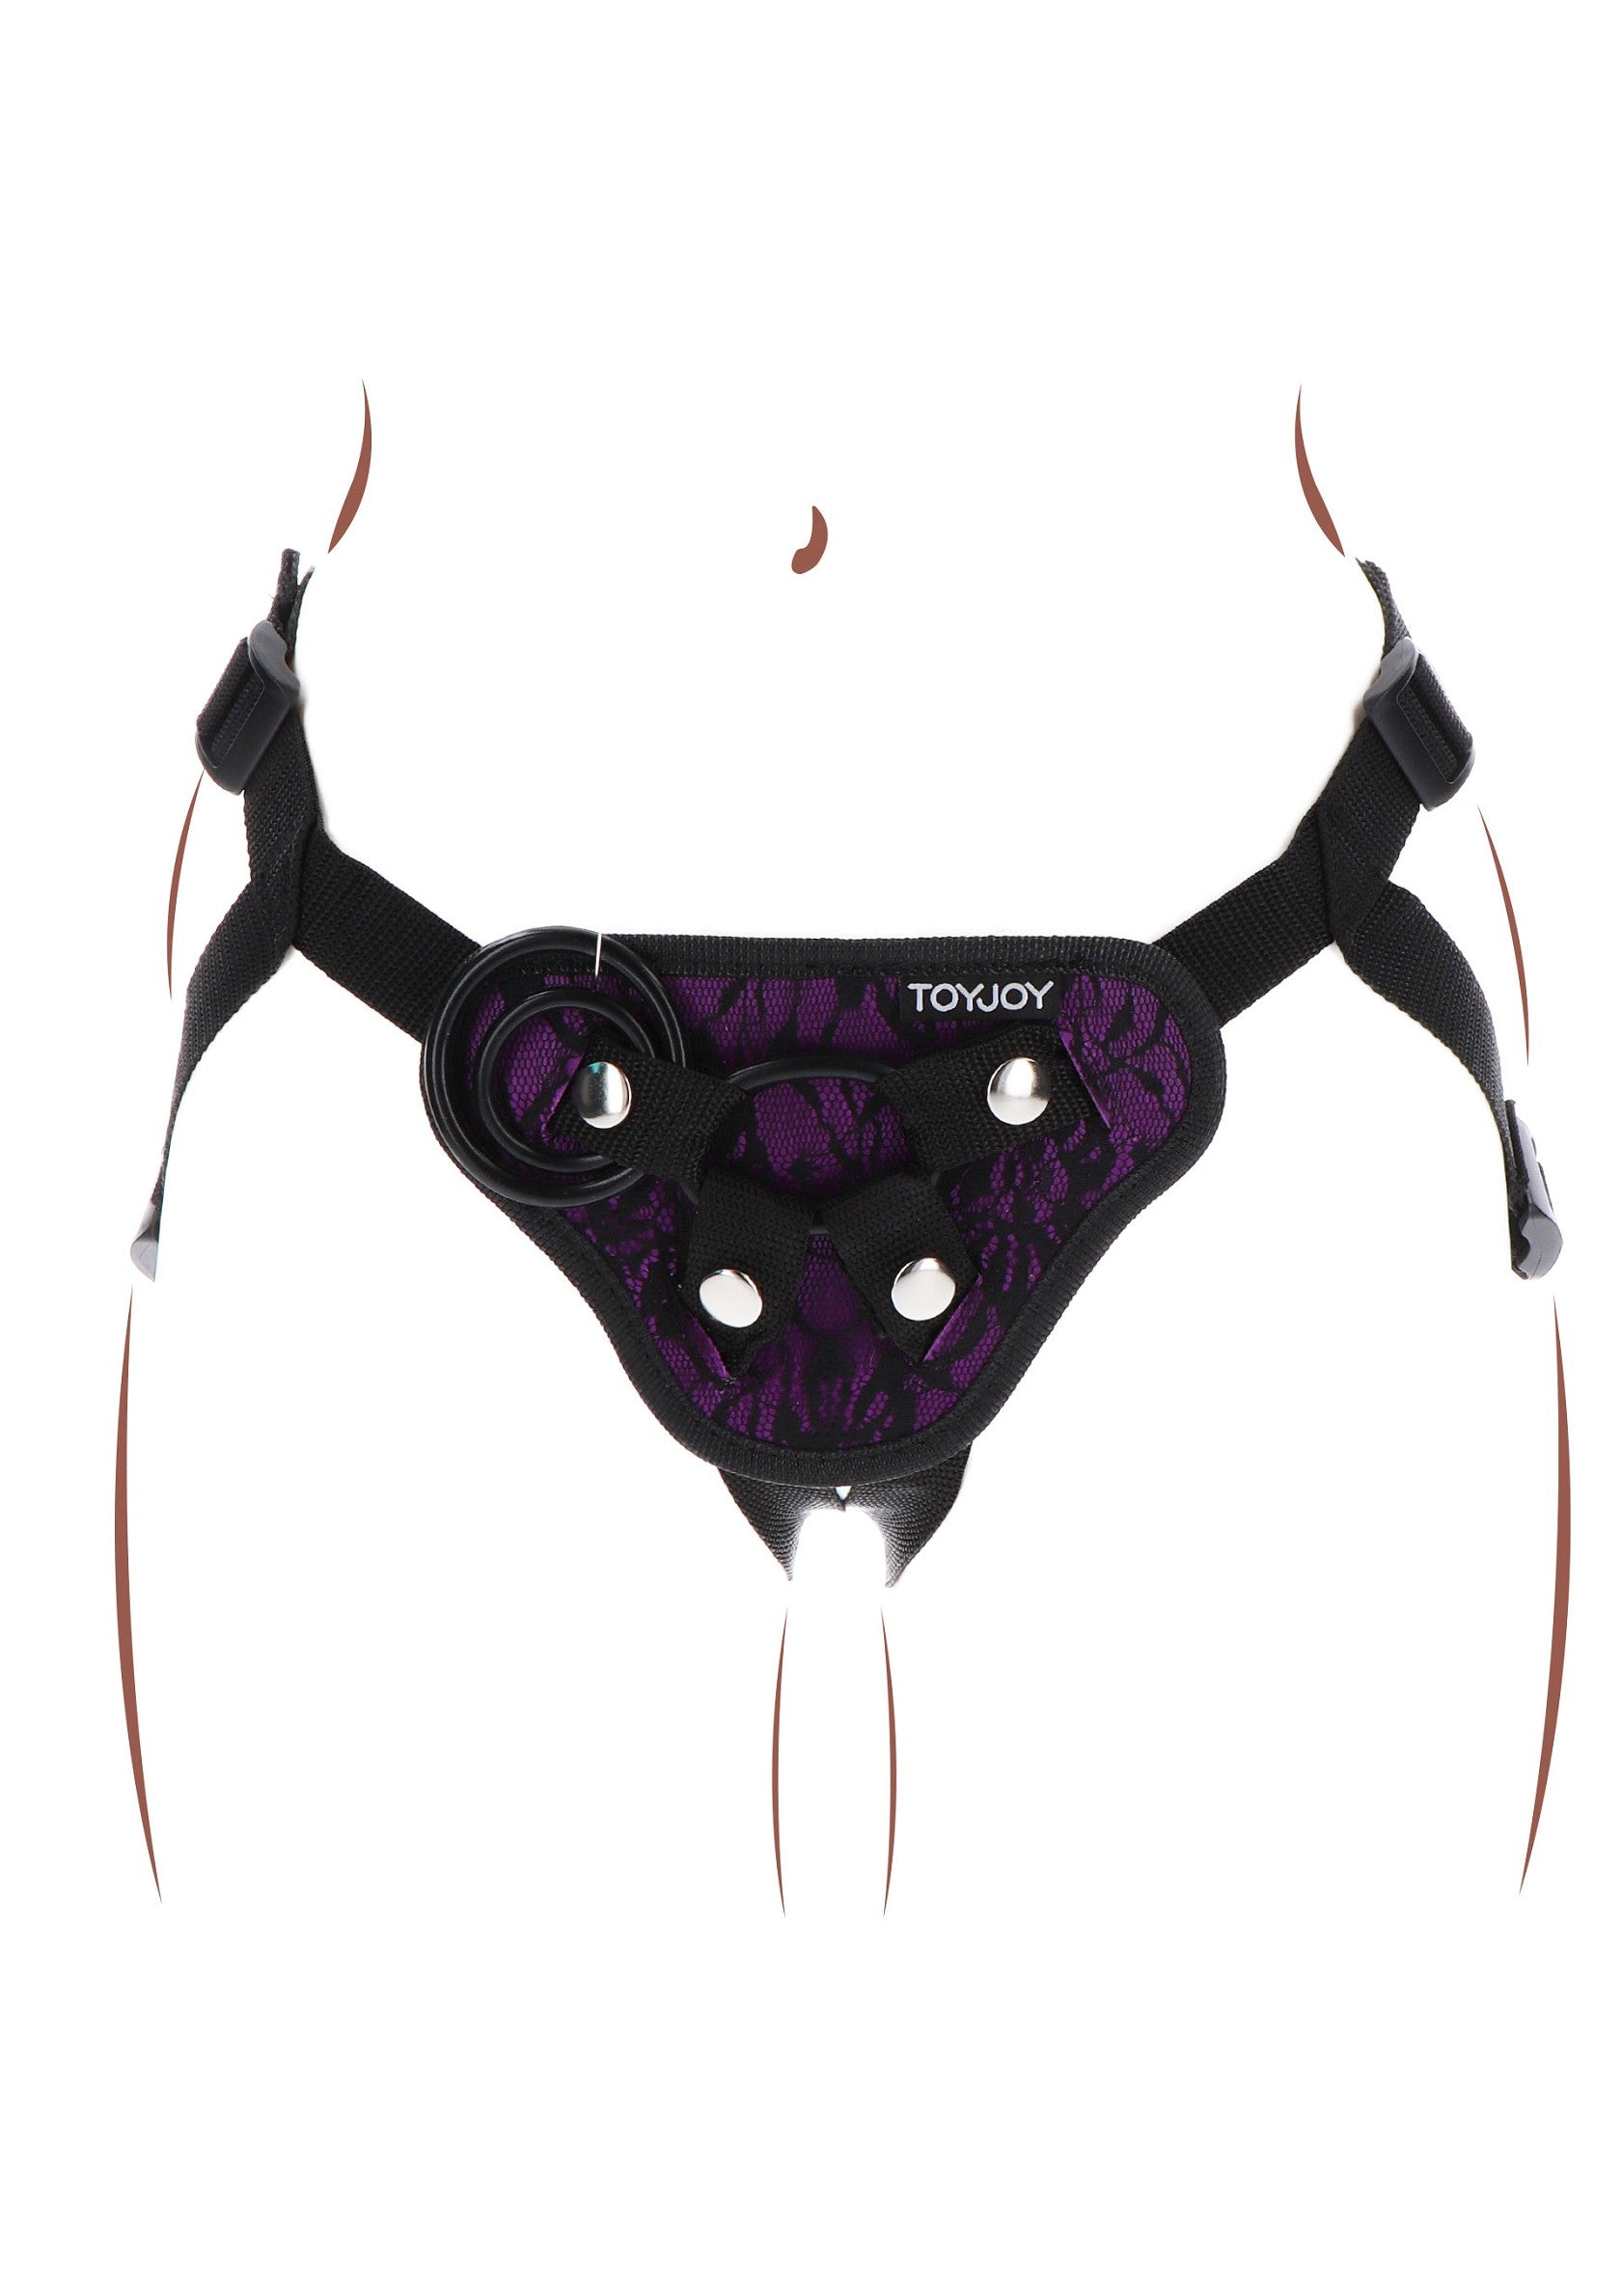 ToyJoy Get Real Strap-On Lace Harness O/S PURPLE - 1